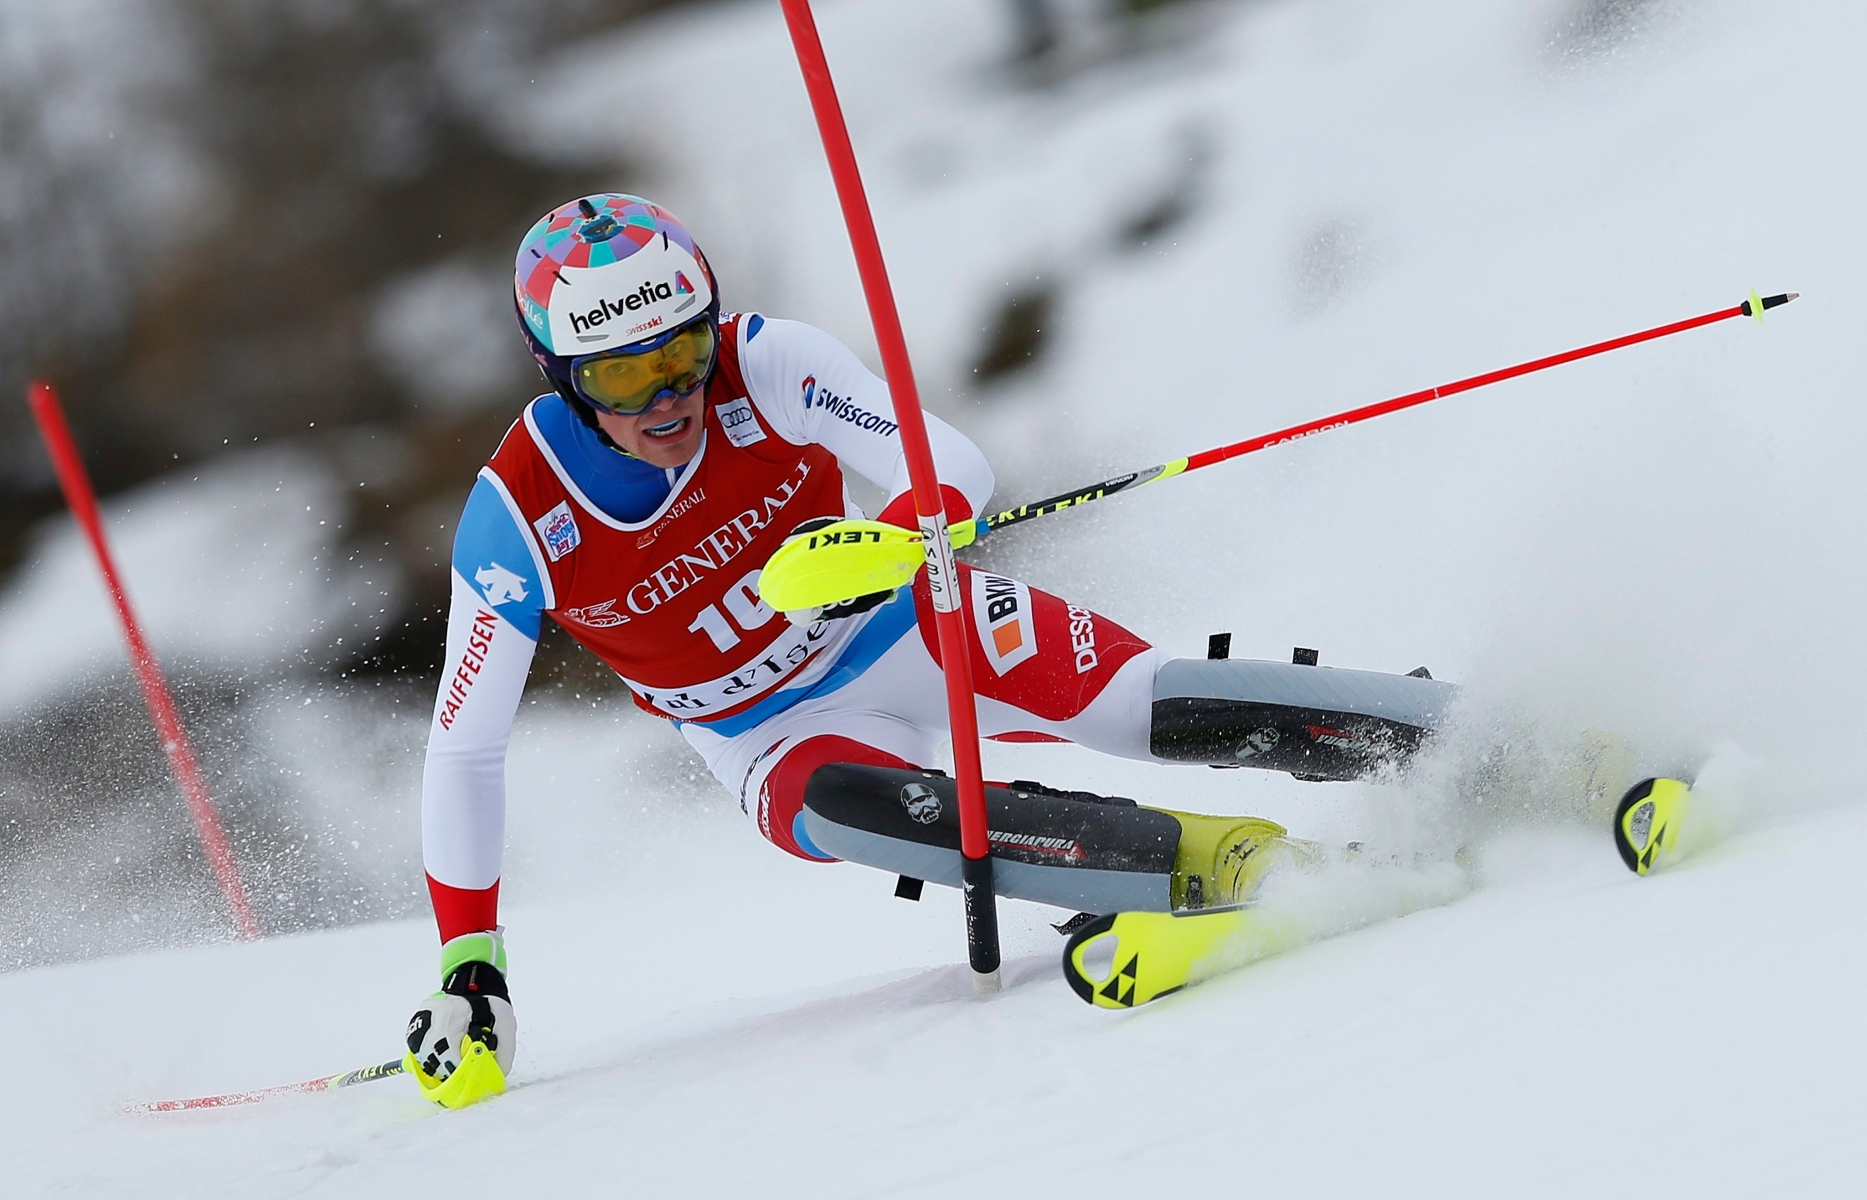 epa05067291 Daniel Yule of Switzerland clears a gate during the first run of the Men's Slalom race at the FIS Alpine Skiing World Cup in Val d'Isere, France, 13 December 2015.  EPA/GUILLAUME HORCAJUELO FRANCE ALPINE SKIING WORLD CUP